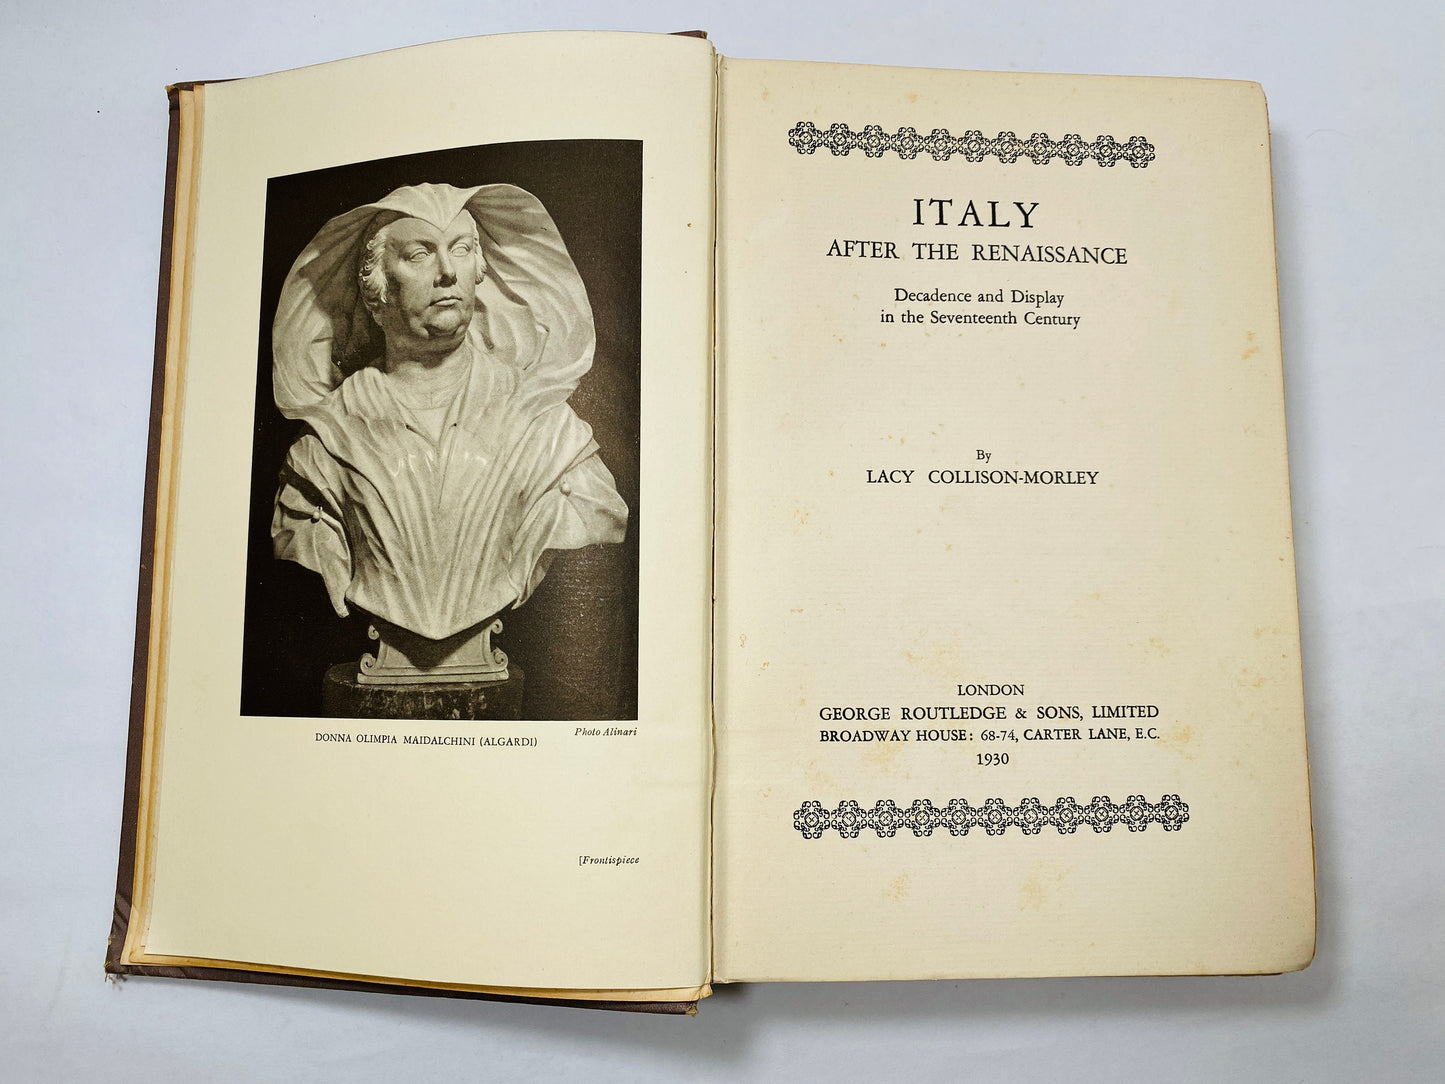 1930 Italy after the Renaissance vintage book by Lacy Collison-Morley Decadence and display in the seventeenth century Beautiful brown decor